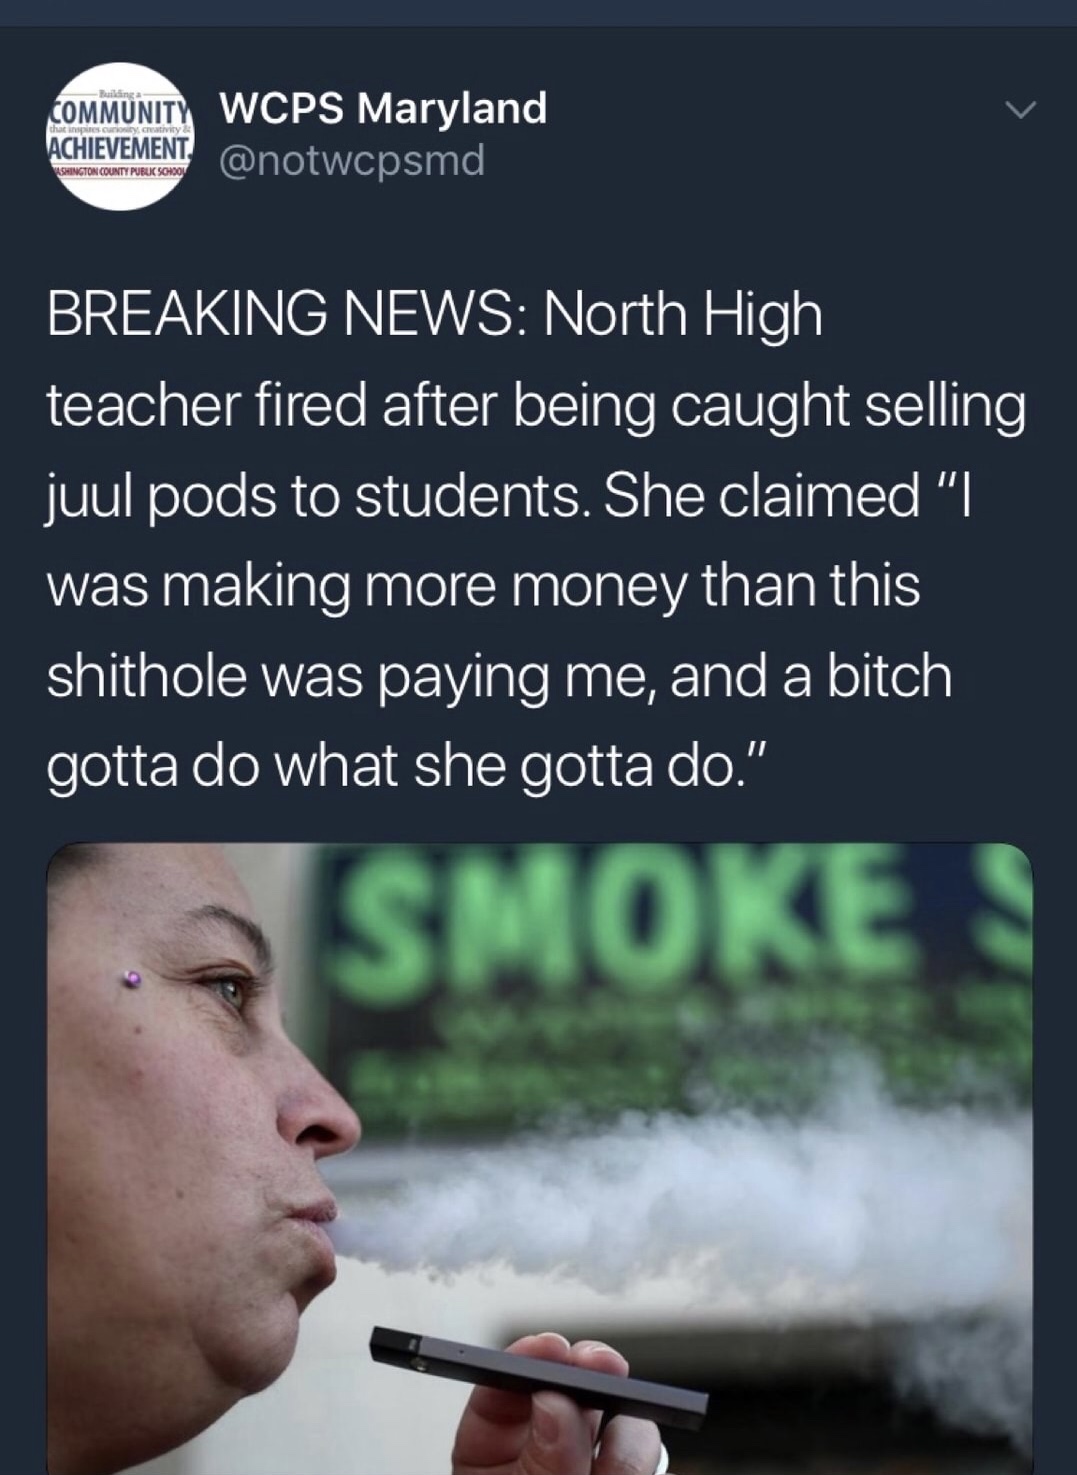 poster - dinga that inspec t ivity Achievement Washington County Public School Community Wcps Maryland Breaking News North High teacher fired after being caught selling juul pods to students. She claimed "|| was making more money than this shithole was pa